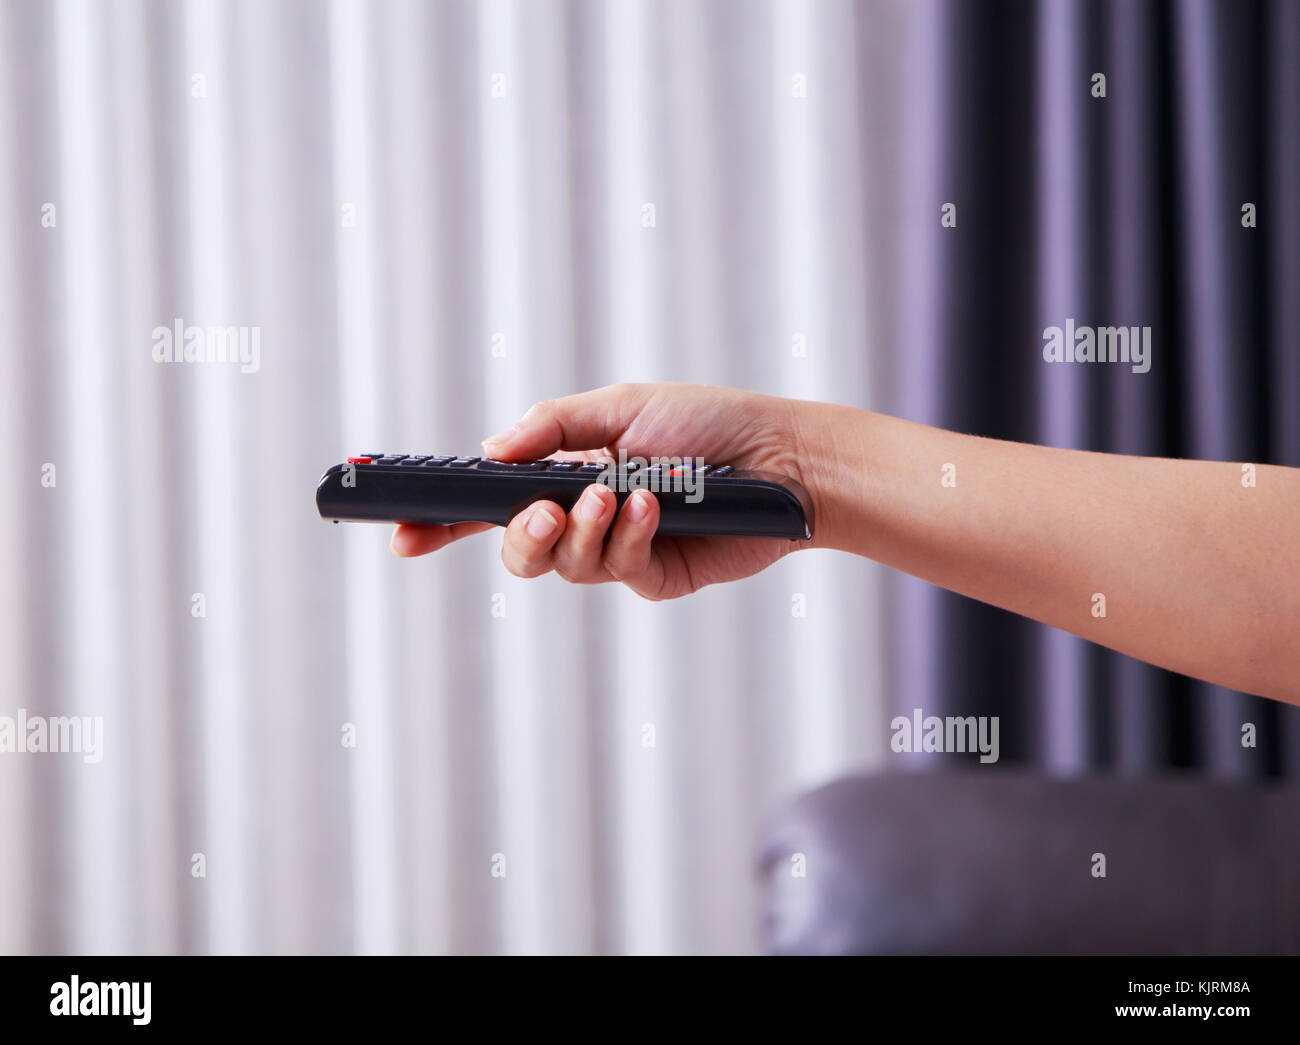 close up of remote tv in hand Stock Photo